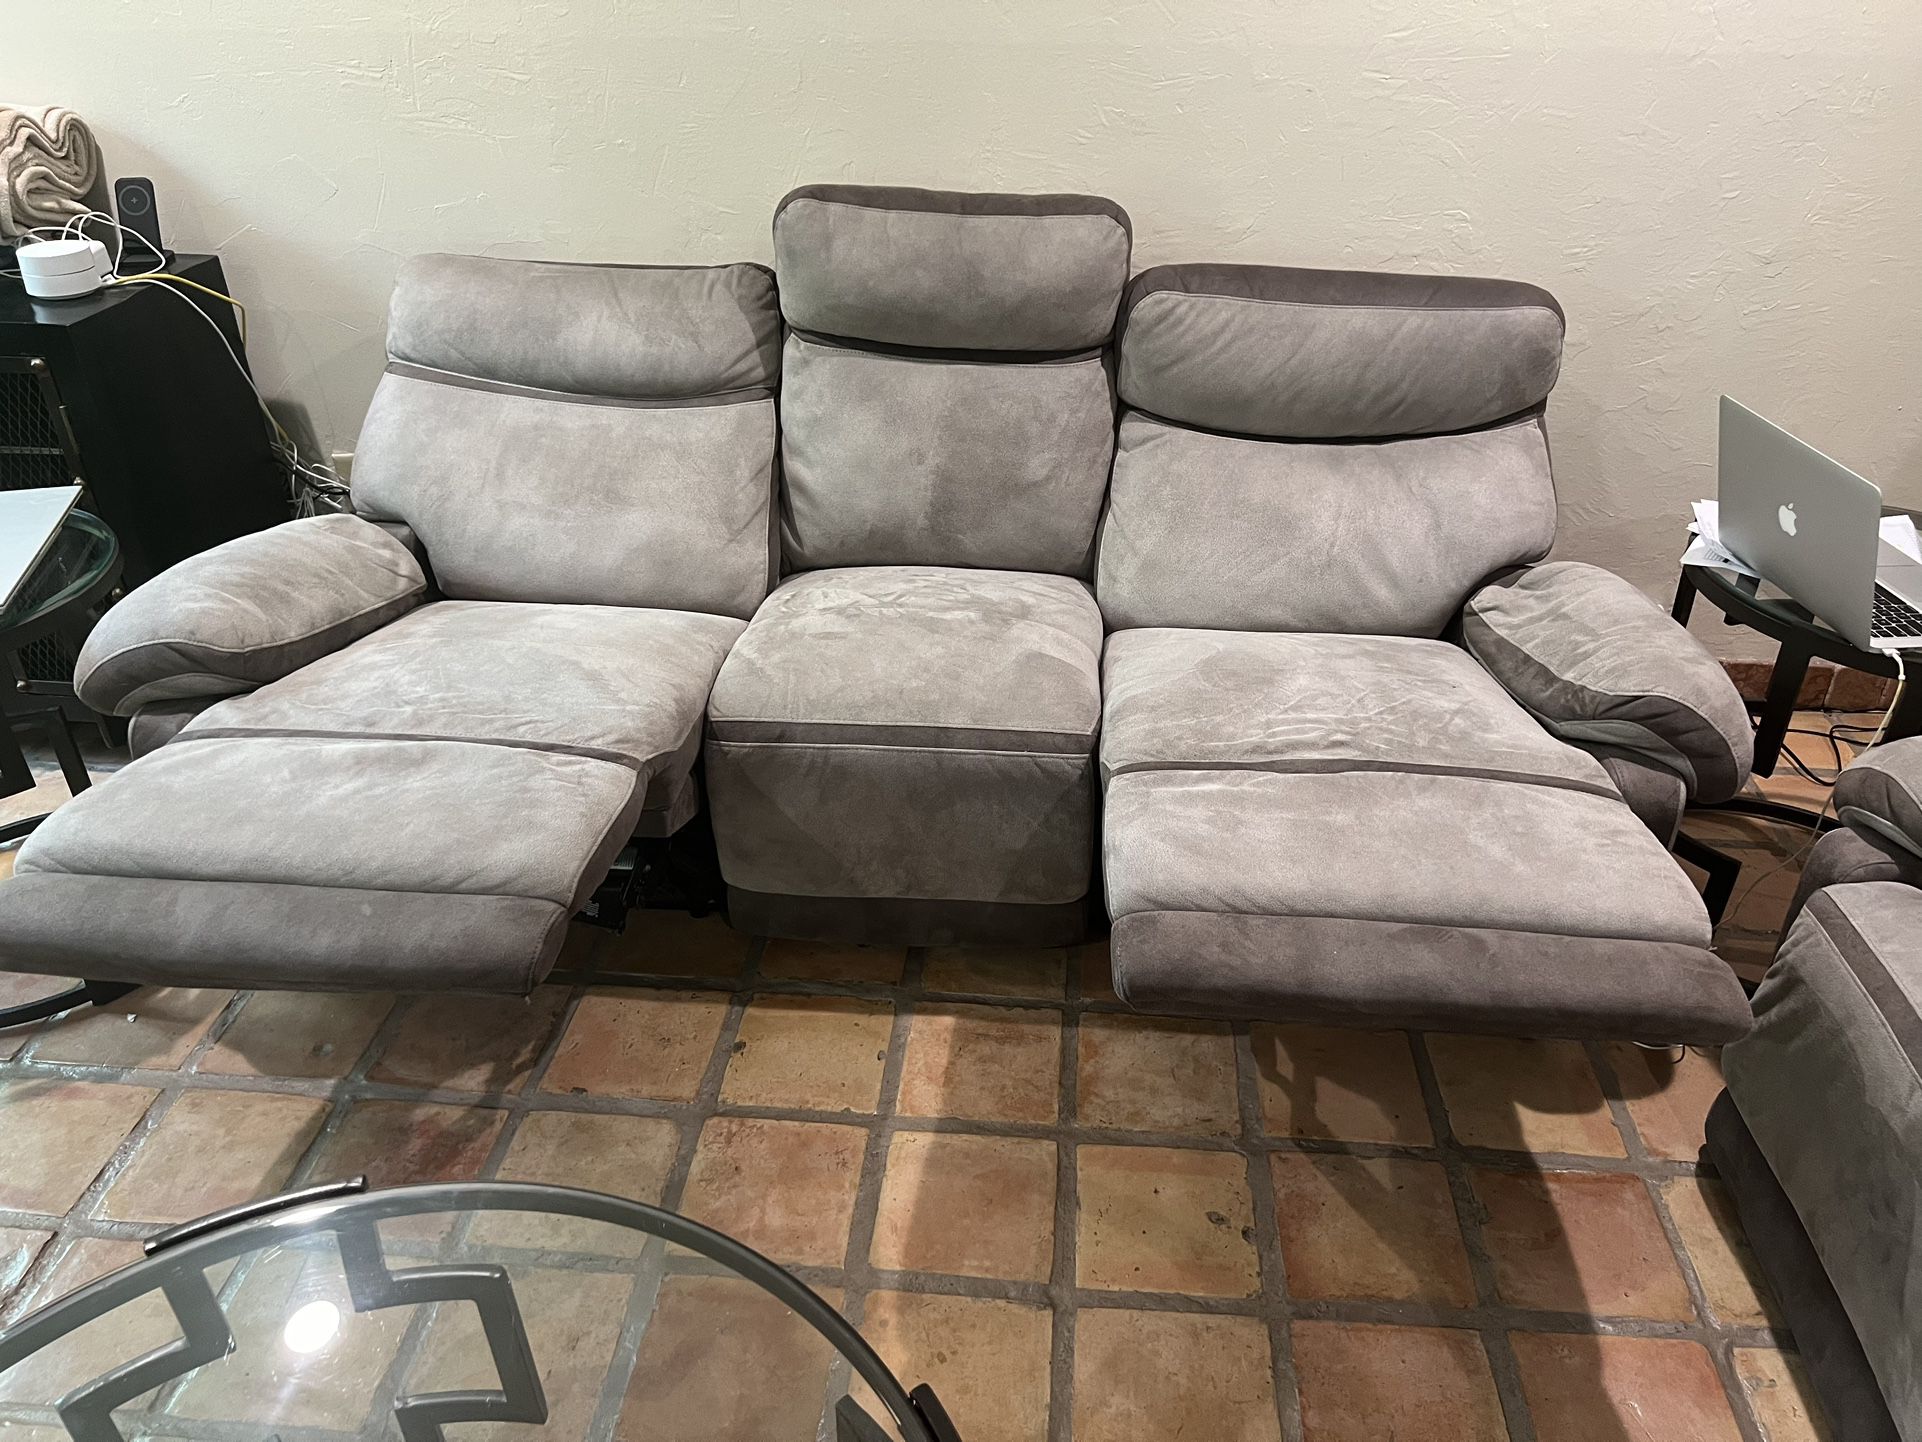 2 Gray Recliners For Sale - $250 Each